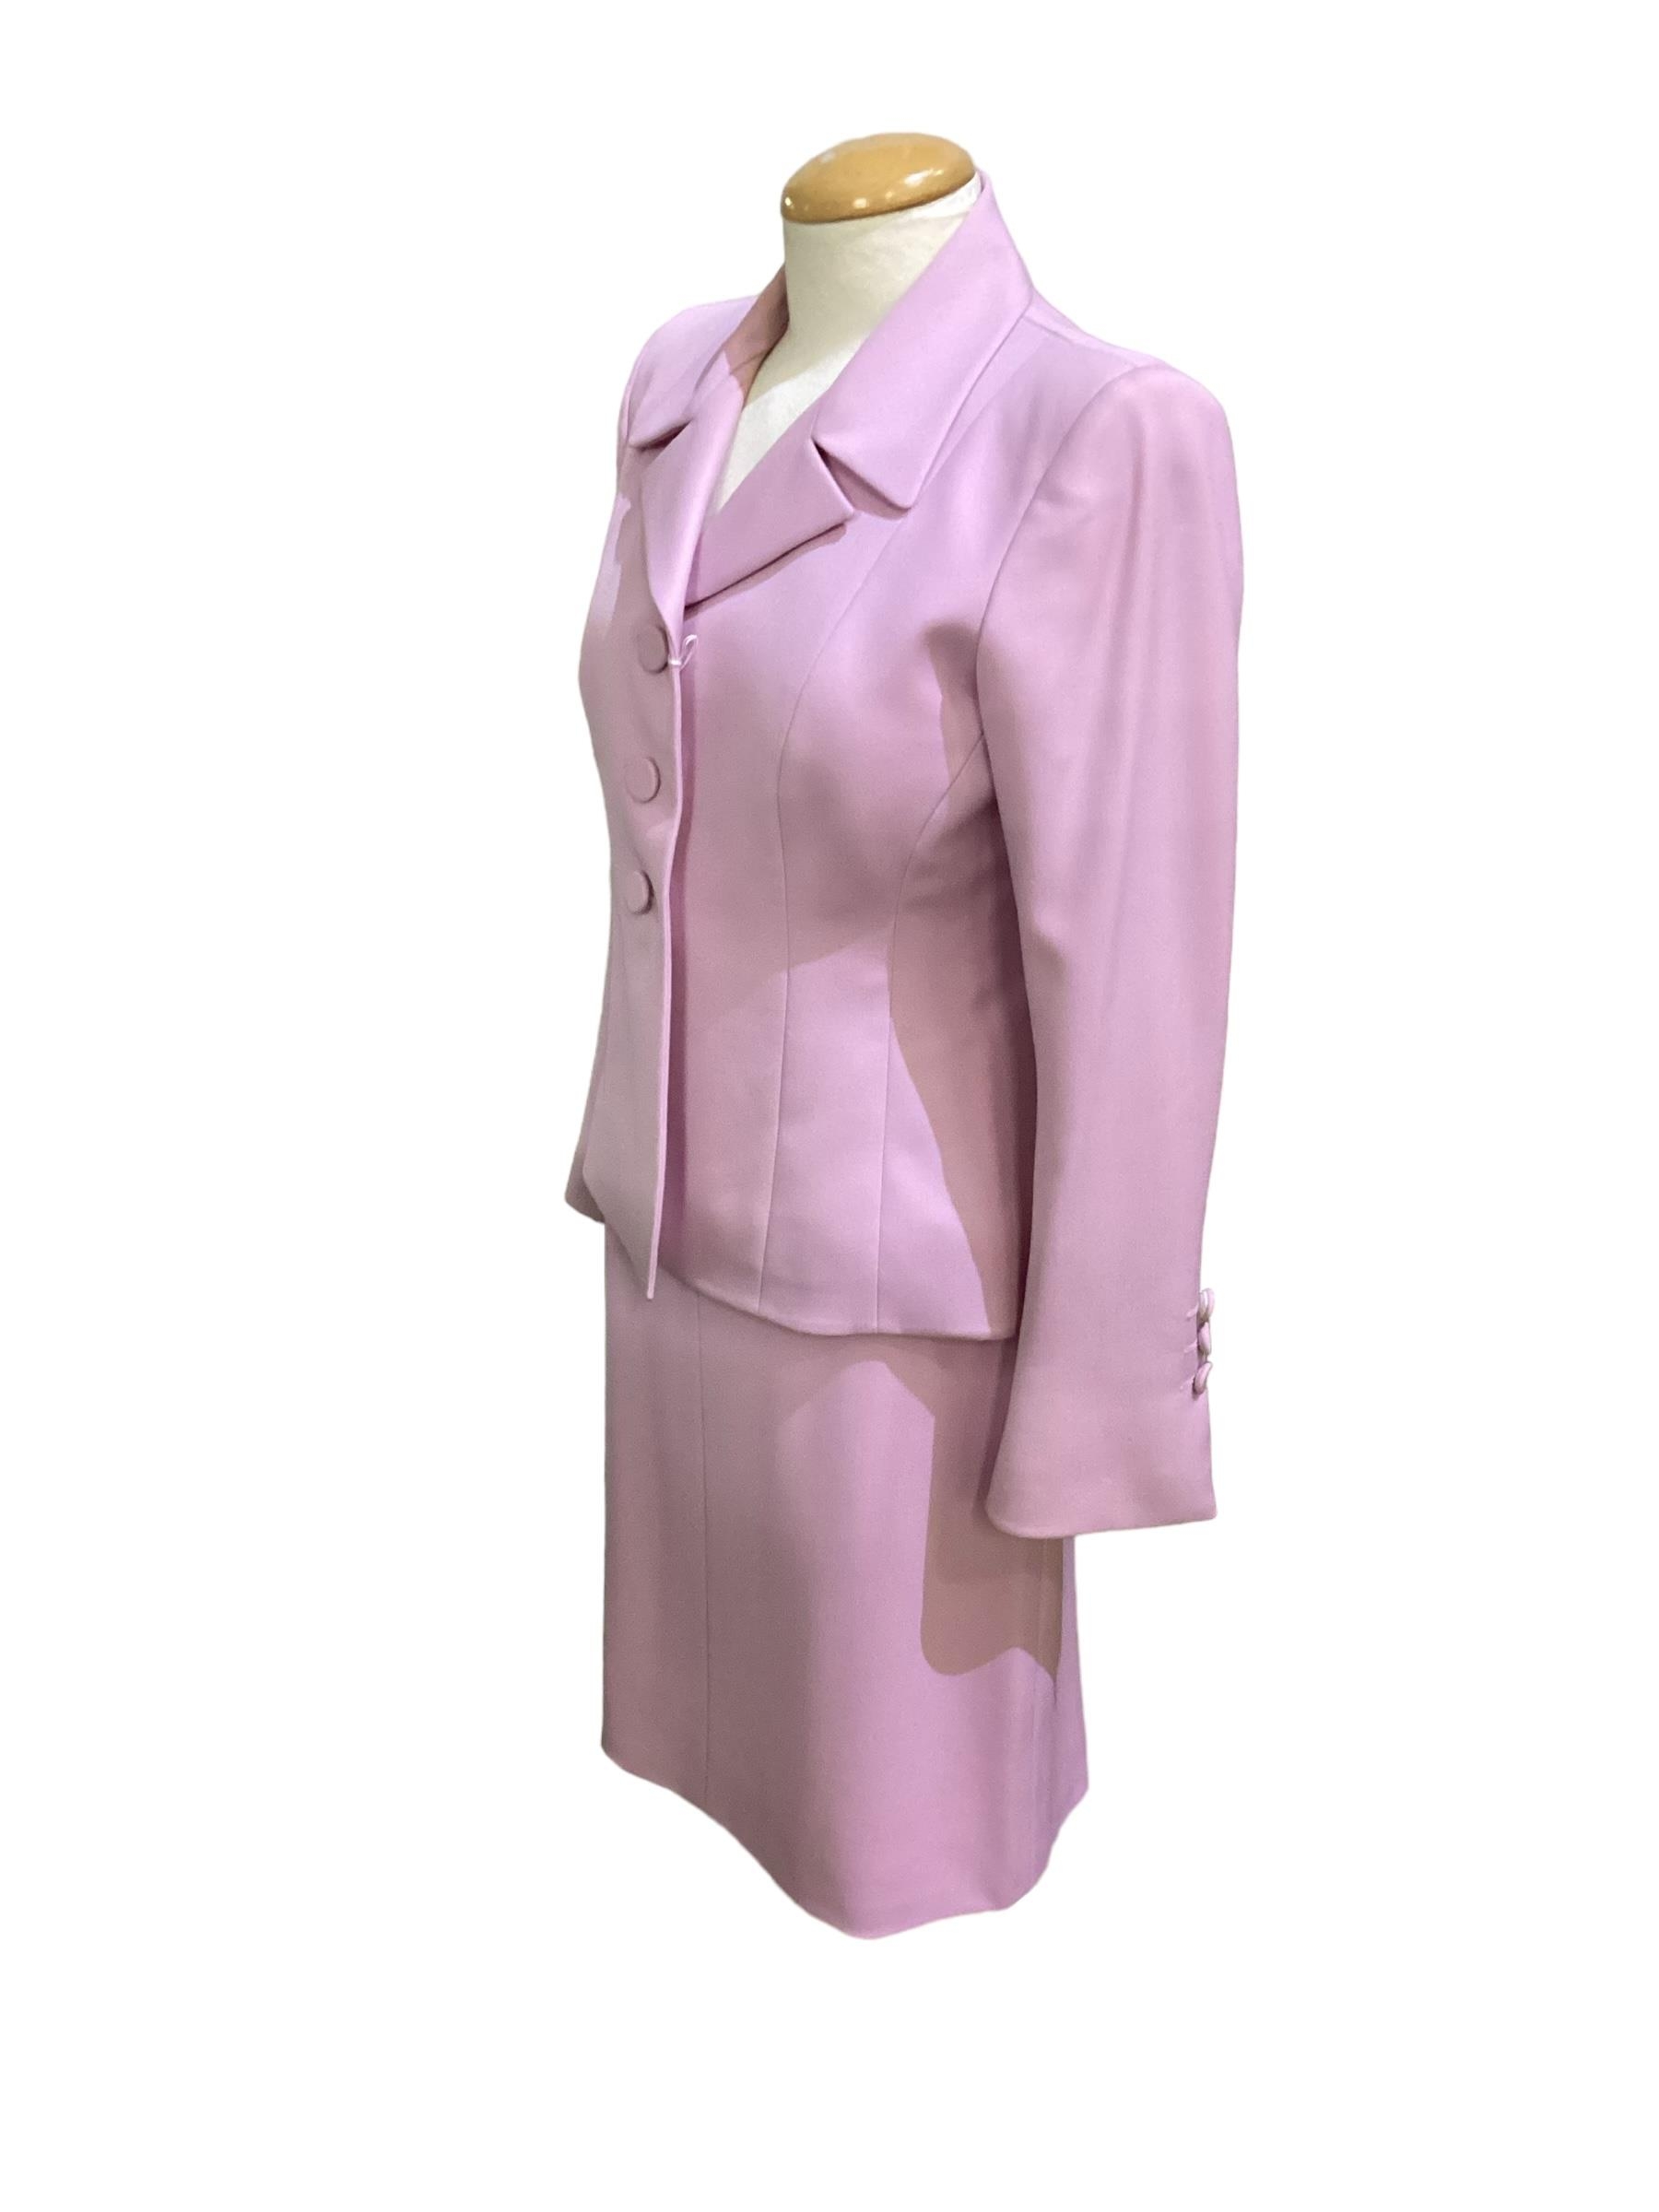 Catherine Walker, London. Pink silk jacket and skirt (make-up stains to collar) blue and cream dress - Image 2 of 13